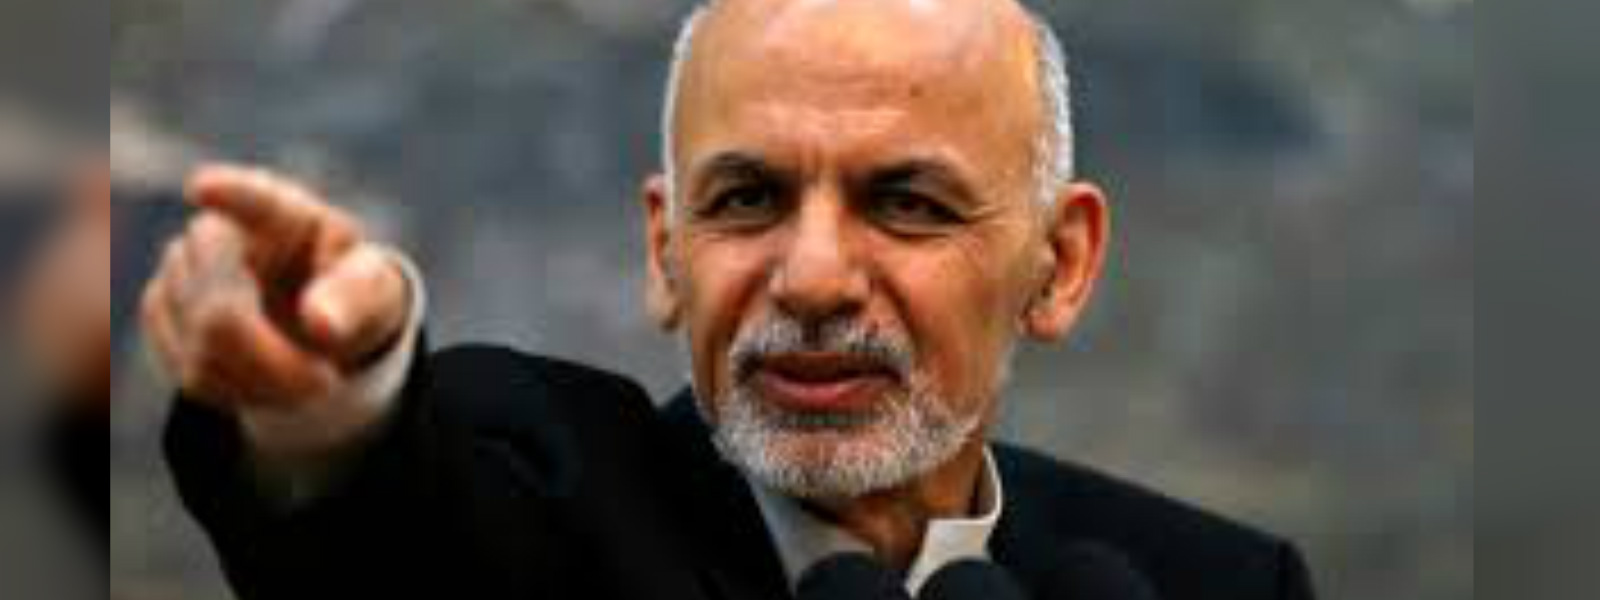 Afghan President Ghani ends ceasefire with Taliban